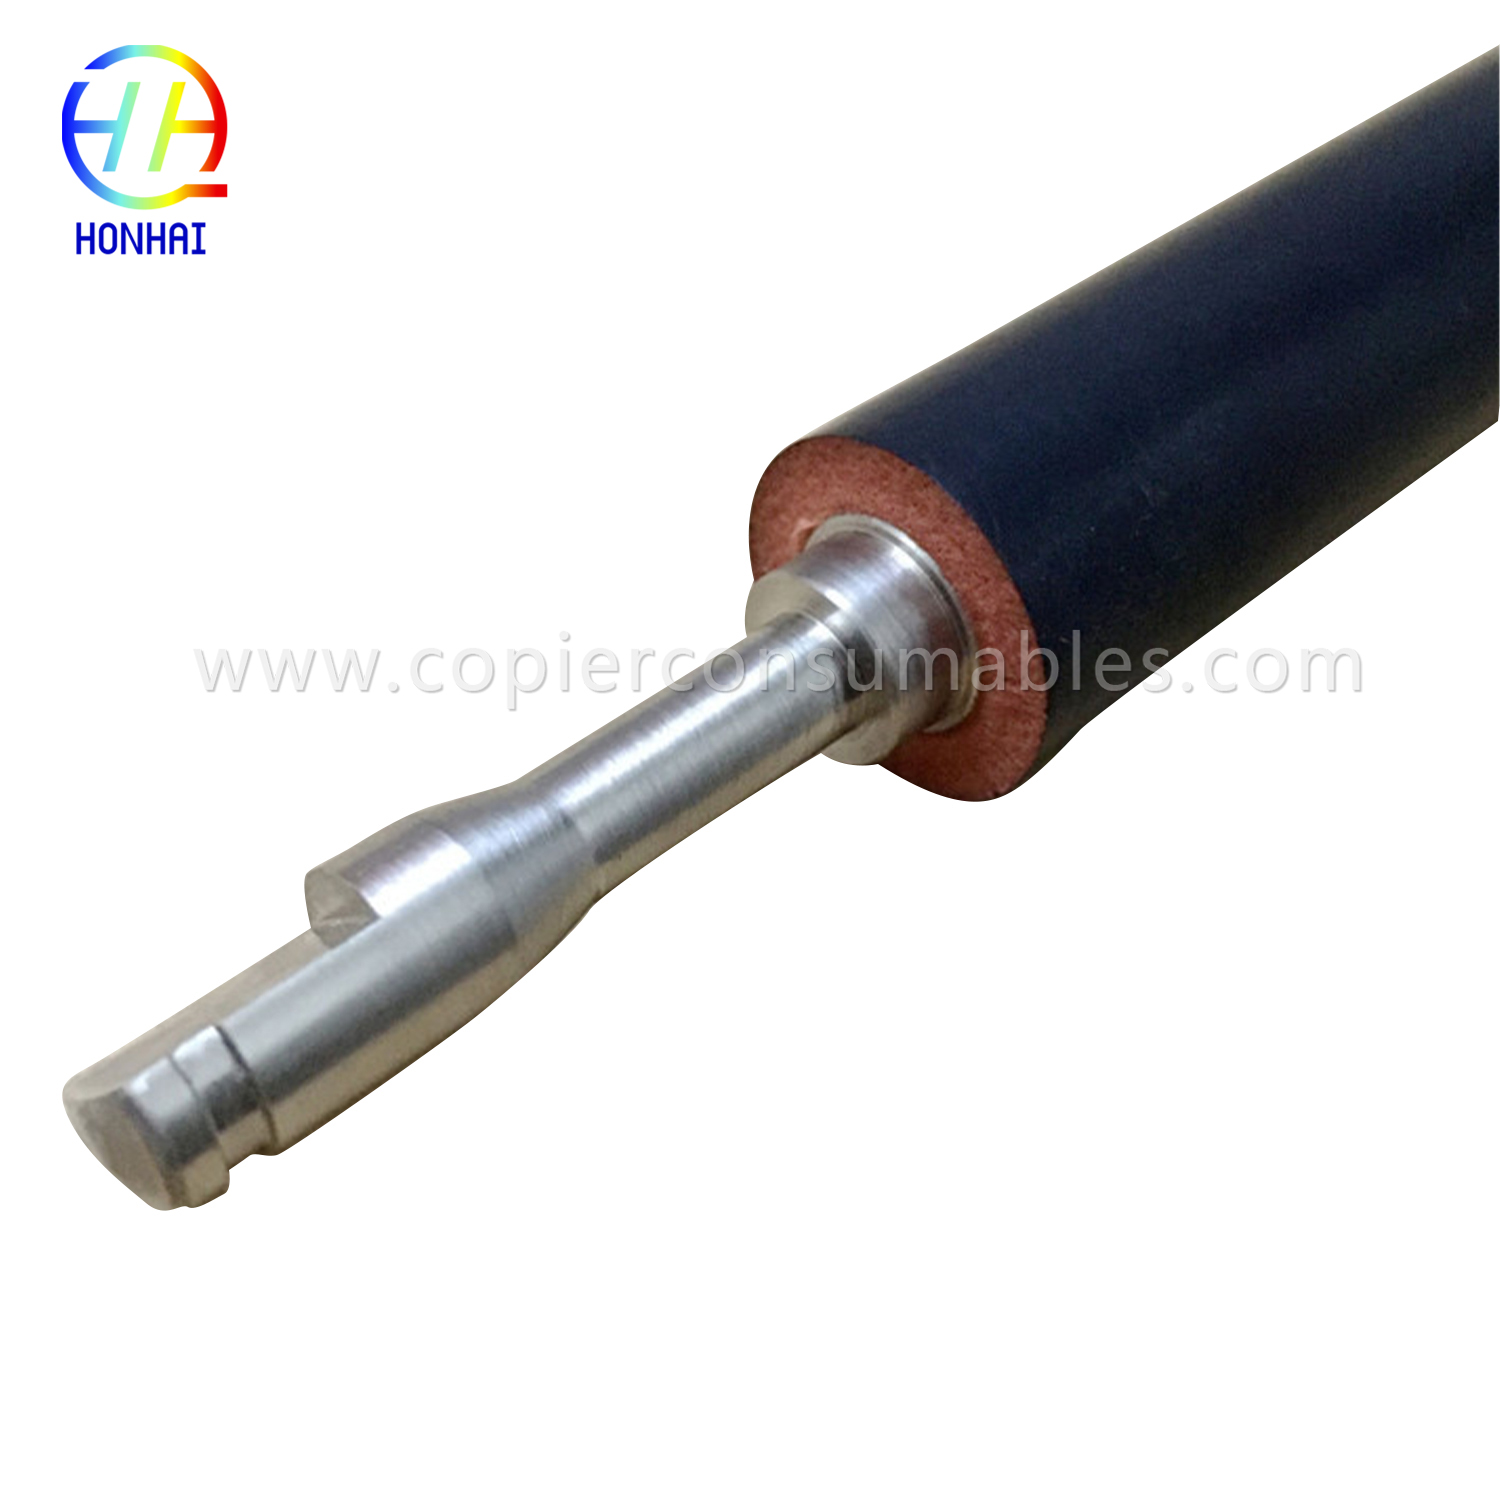 Lower Pressure Roller for HP M1212 M1536 P1606